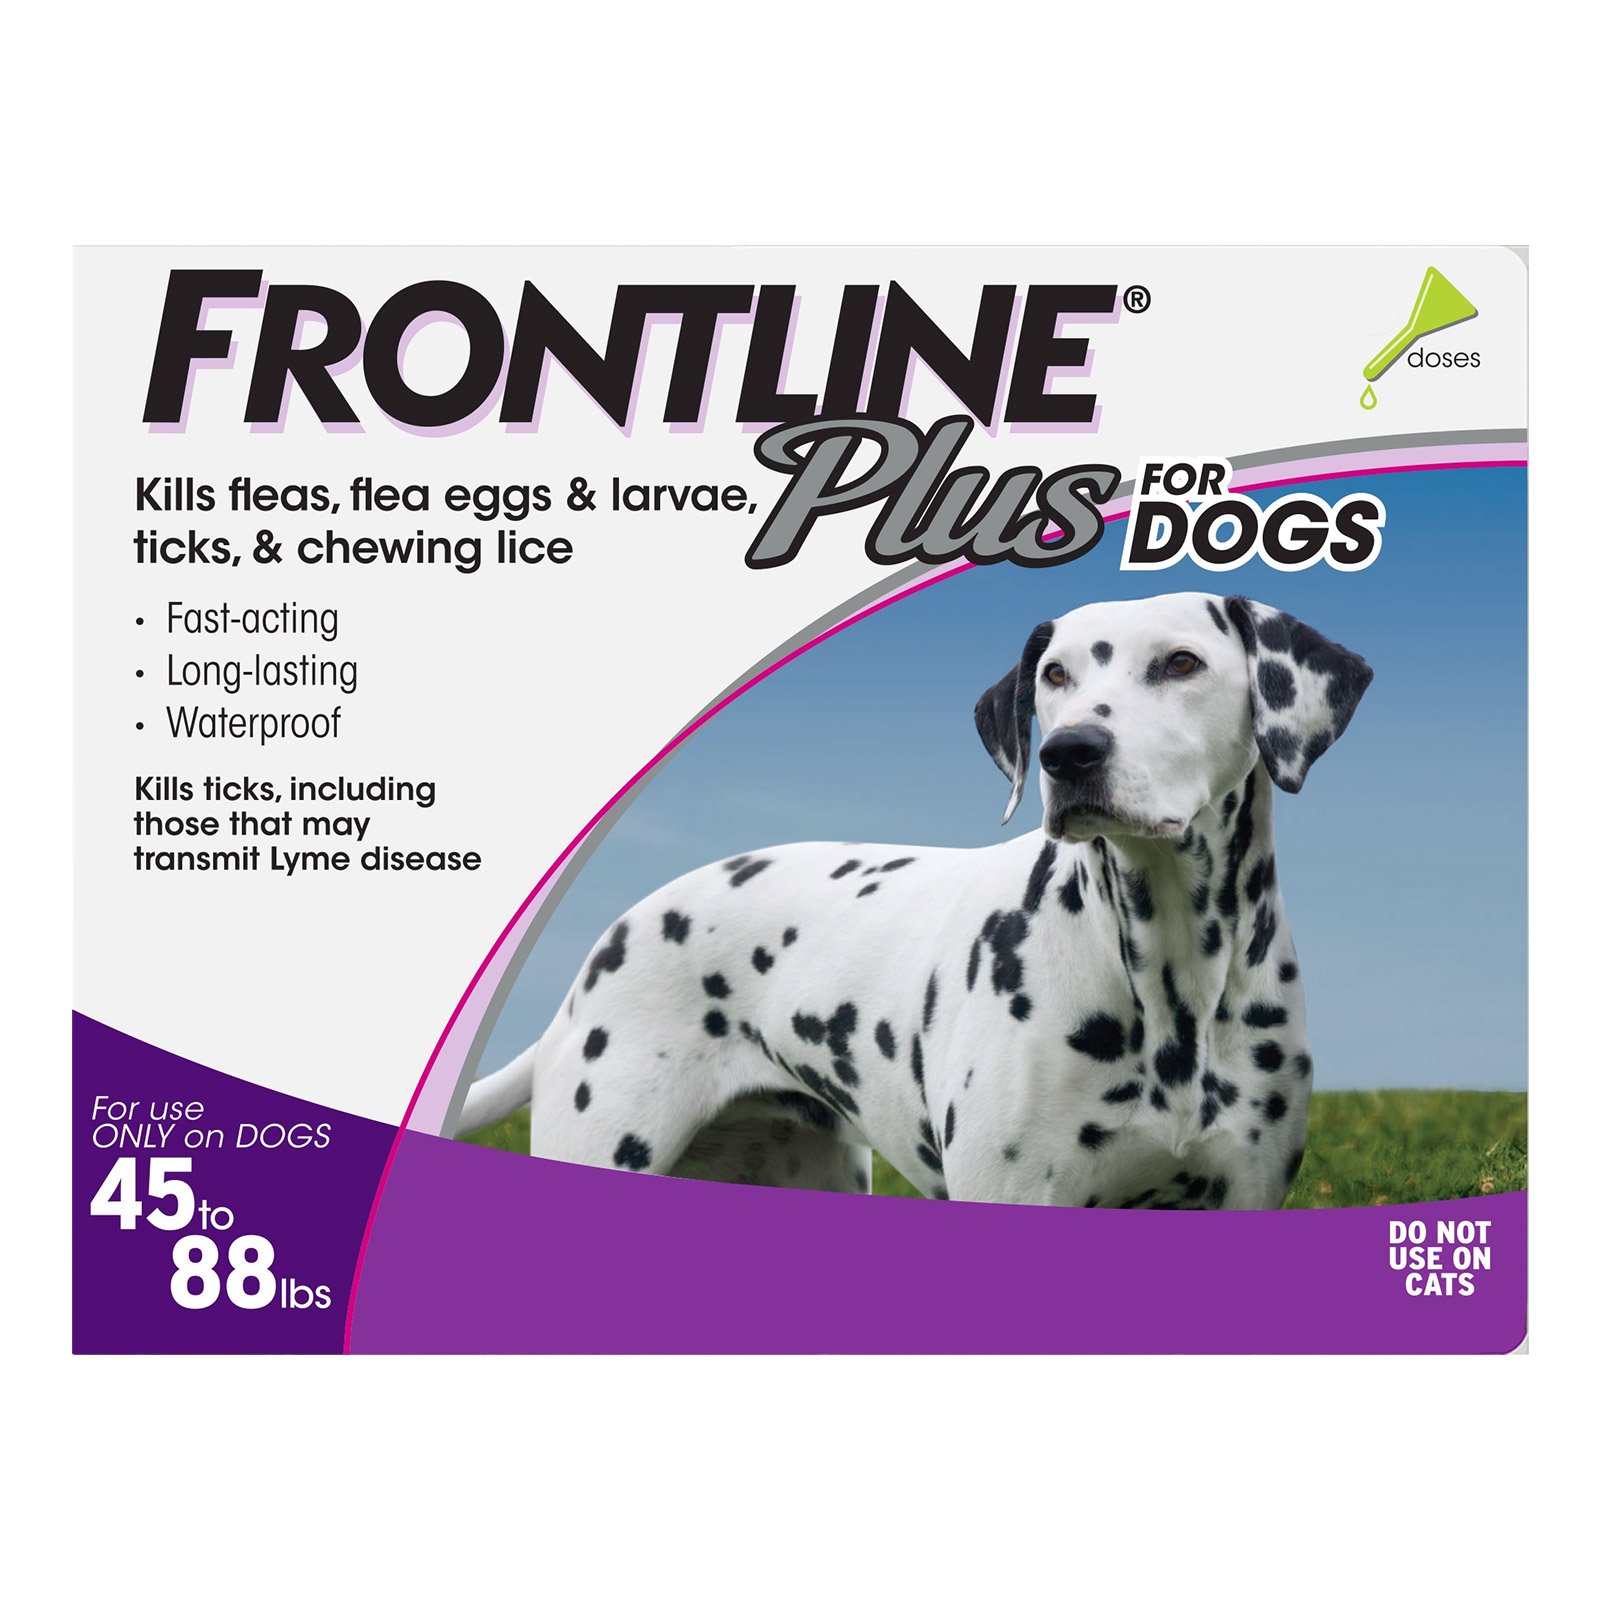 Frontline Plus for Dogs : Buy branded Frontline Plus for Dogs for Flea & Tick Control treatment with free shipping to all over USA. Frontline Plus is a fast-acting flea and tick preventative, killing all fleas on your dog in 12 hours and stopping infestations for a month.